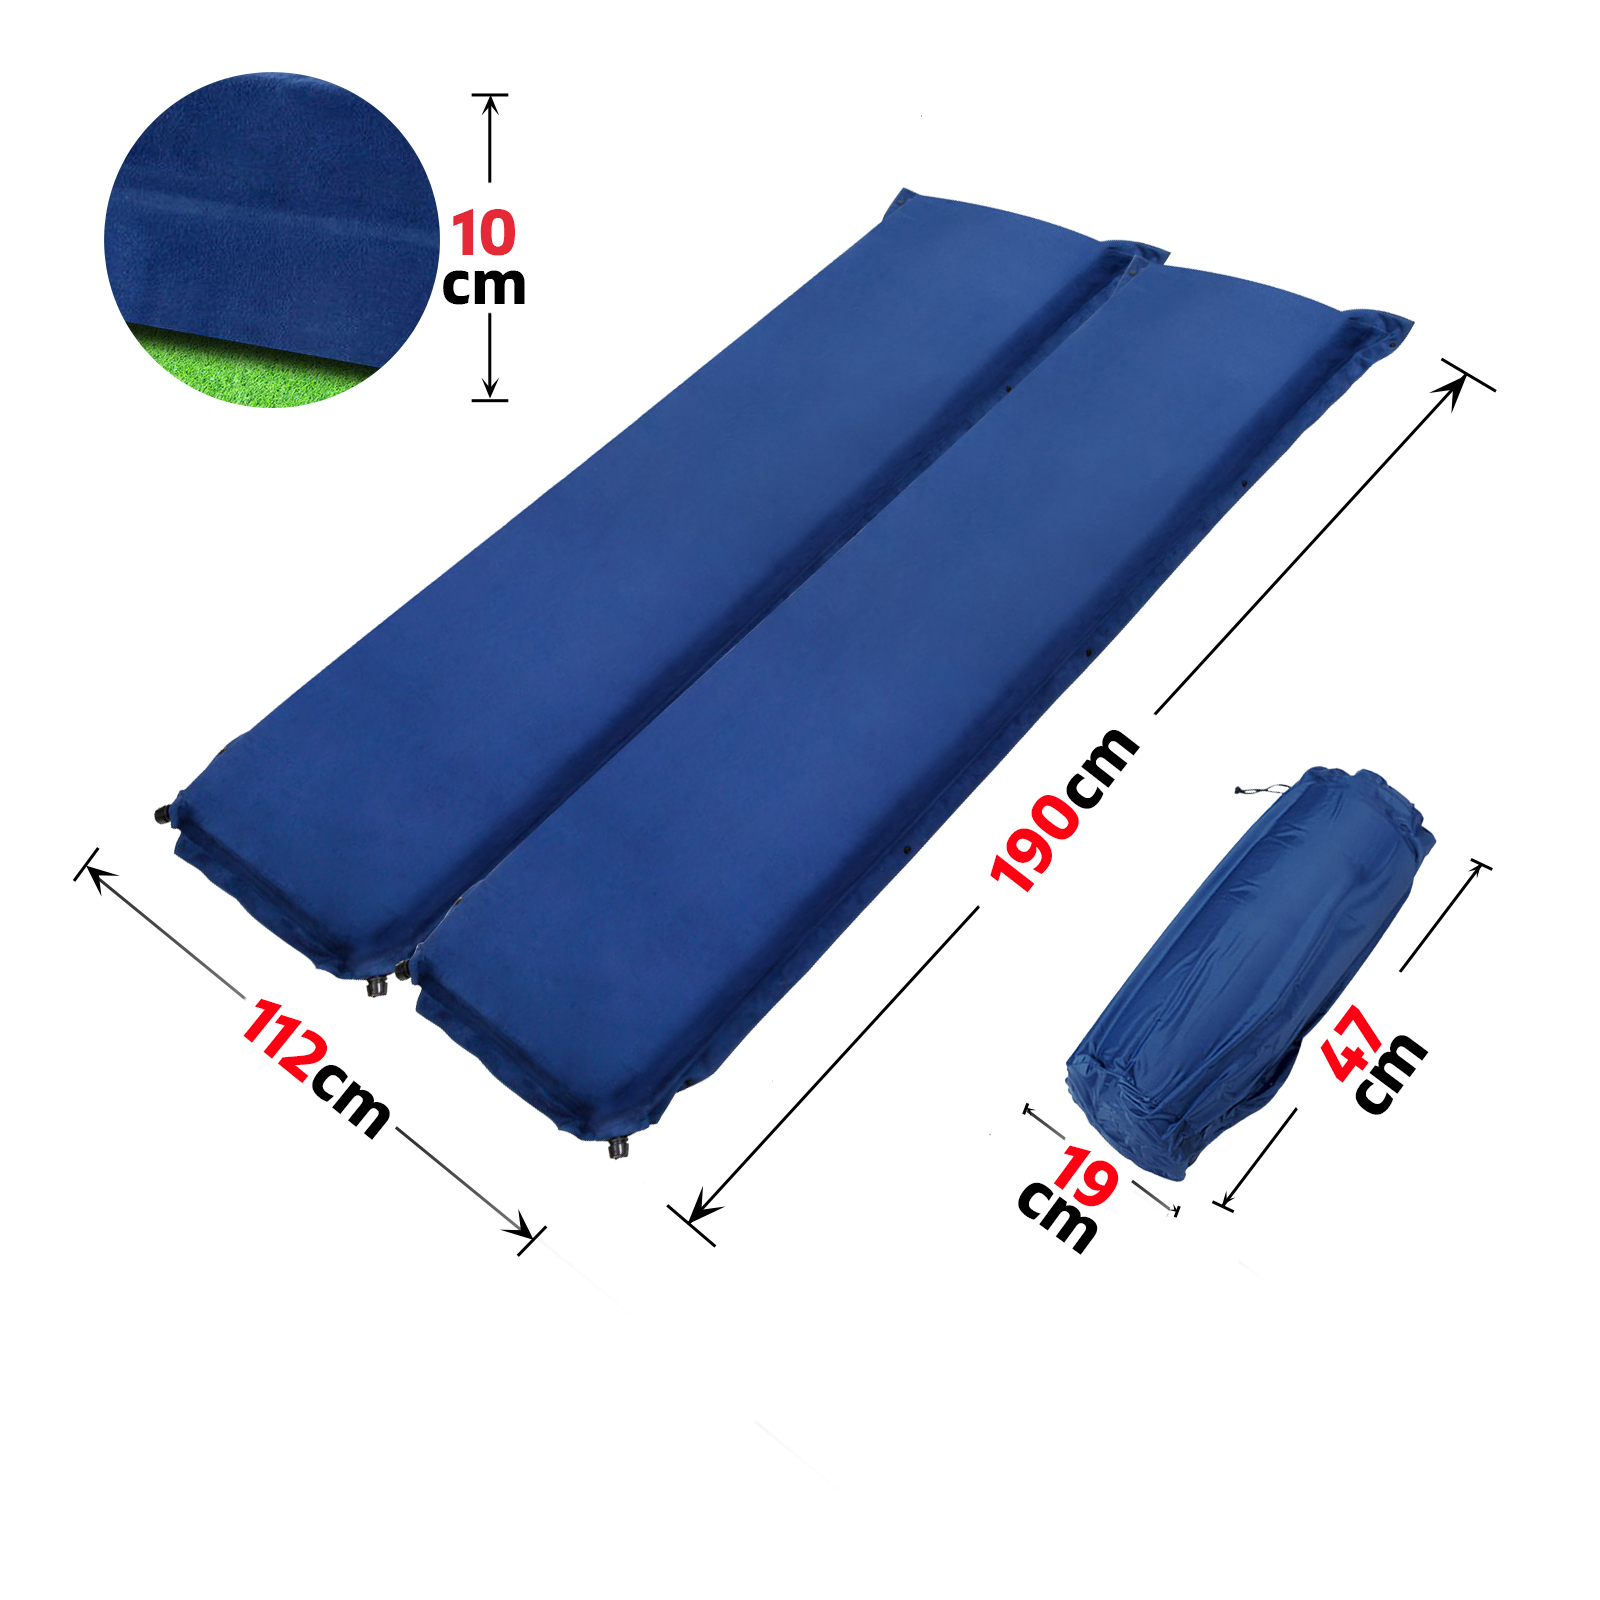 Double Self Inflating Mattress Camping Sleeping Mat Air Bed Pad Navy 10CM Thick